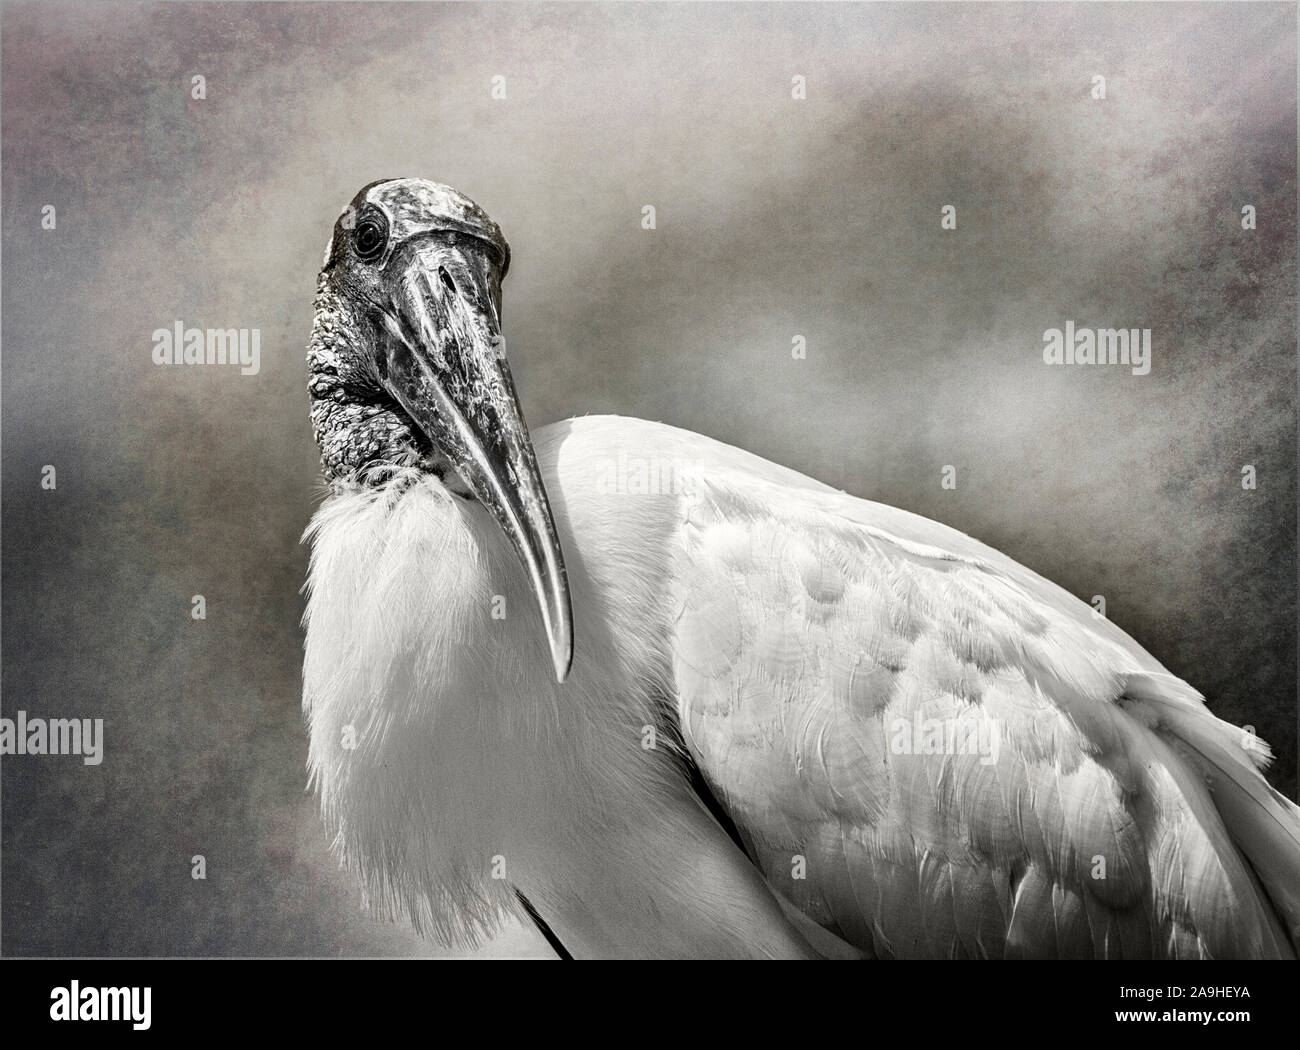 Adult Wood Stork Portrait against textured background with inquisitive expression Stock Photo